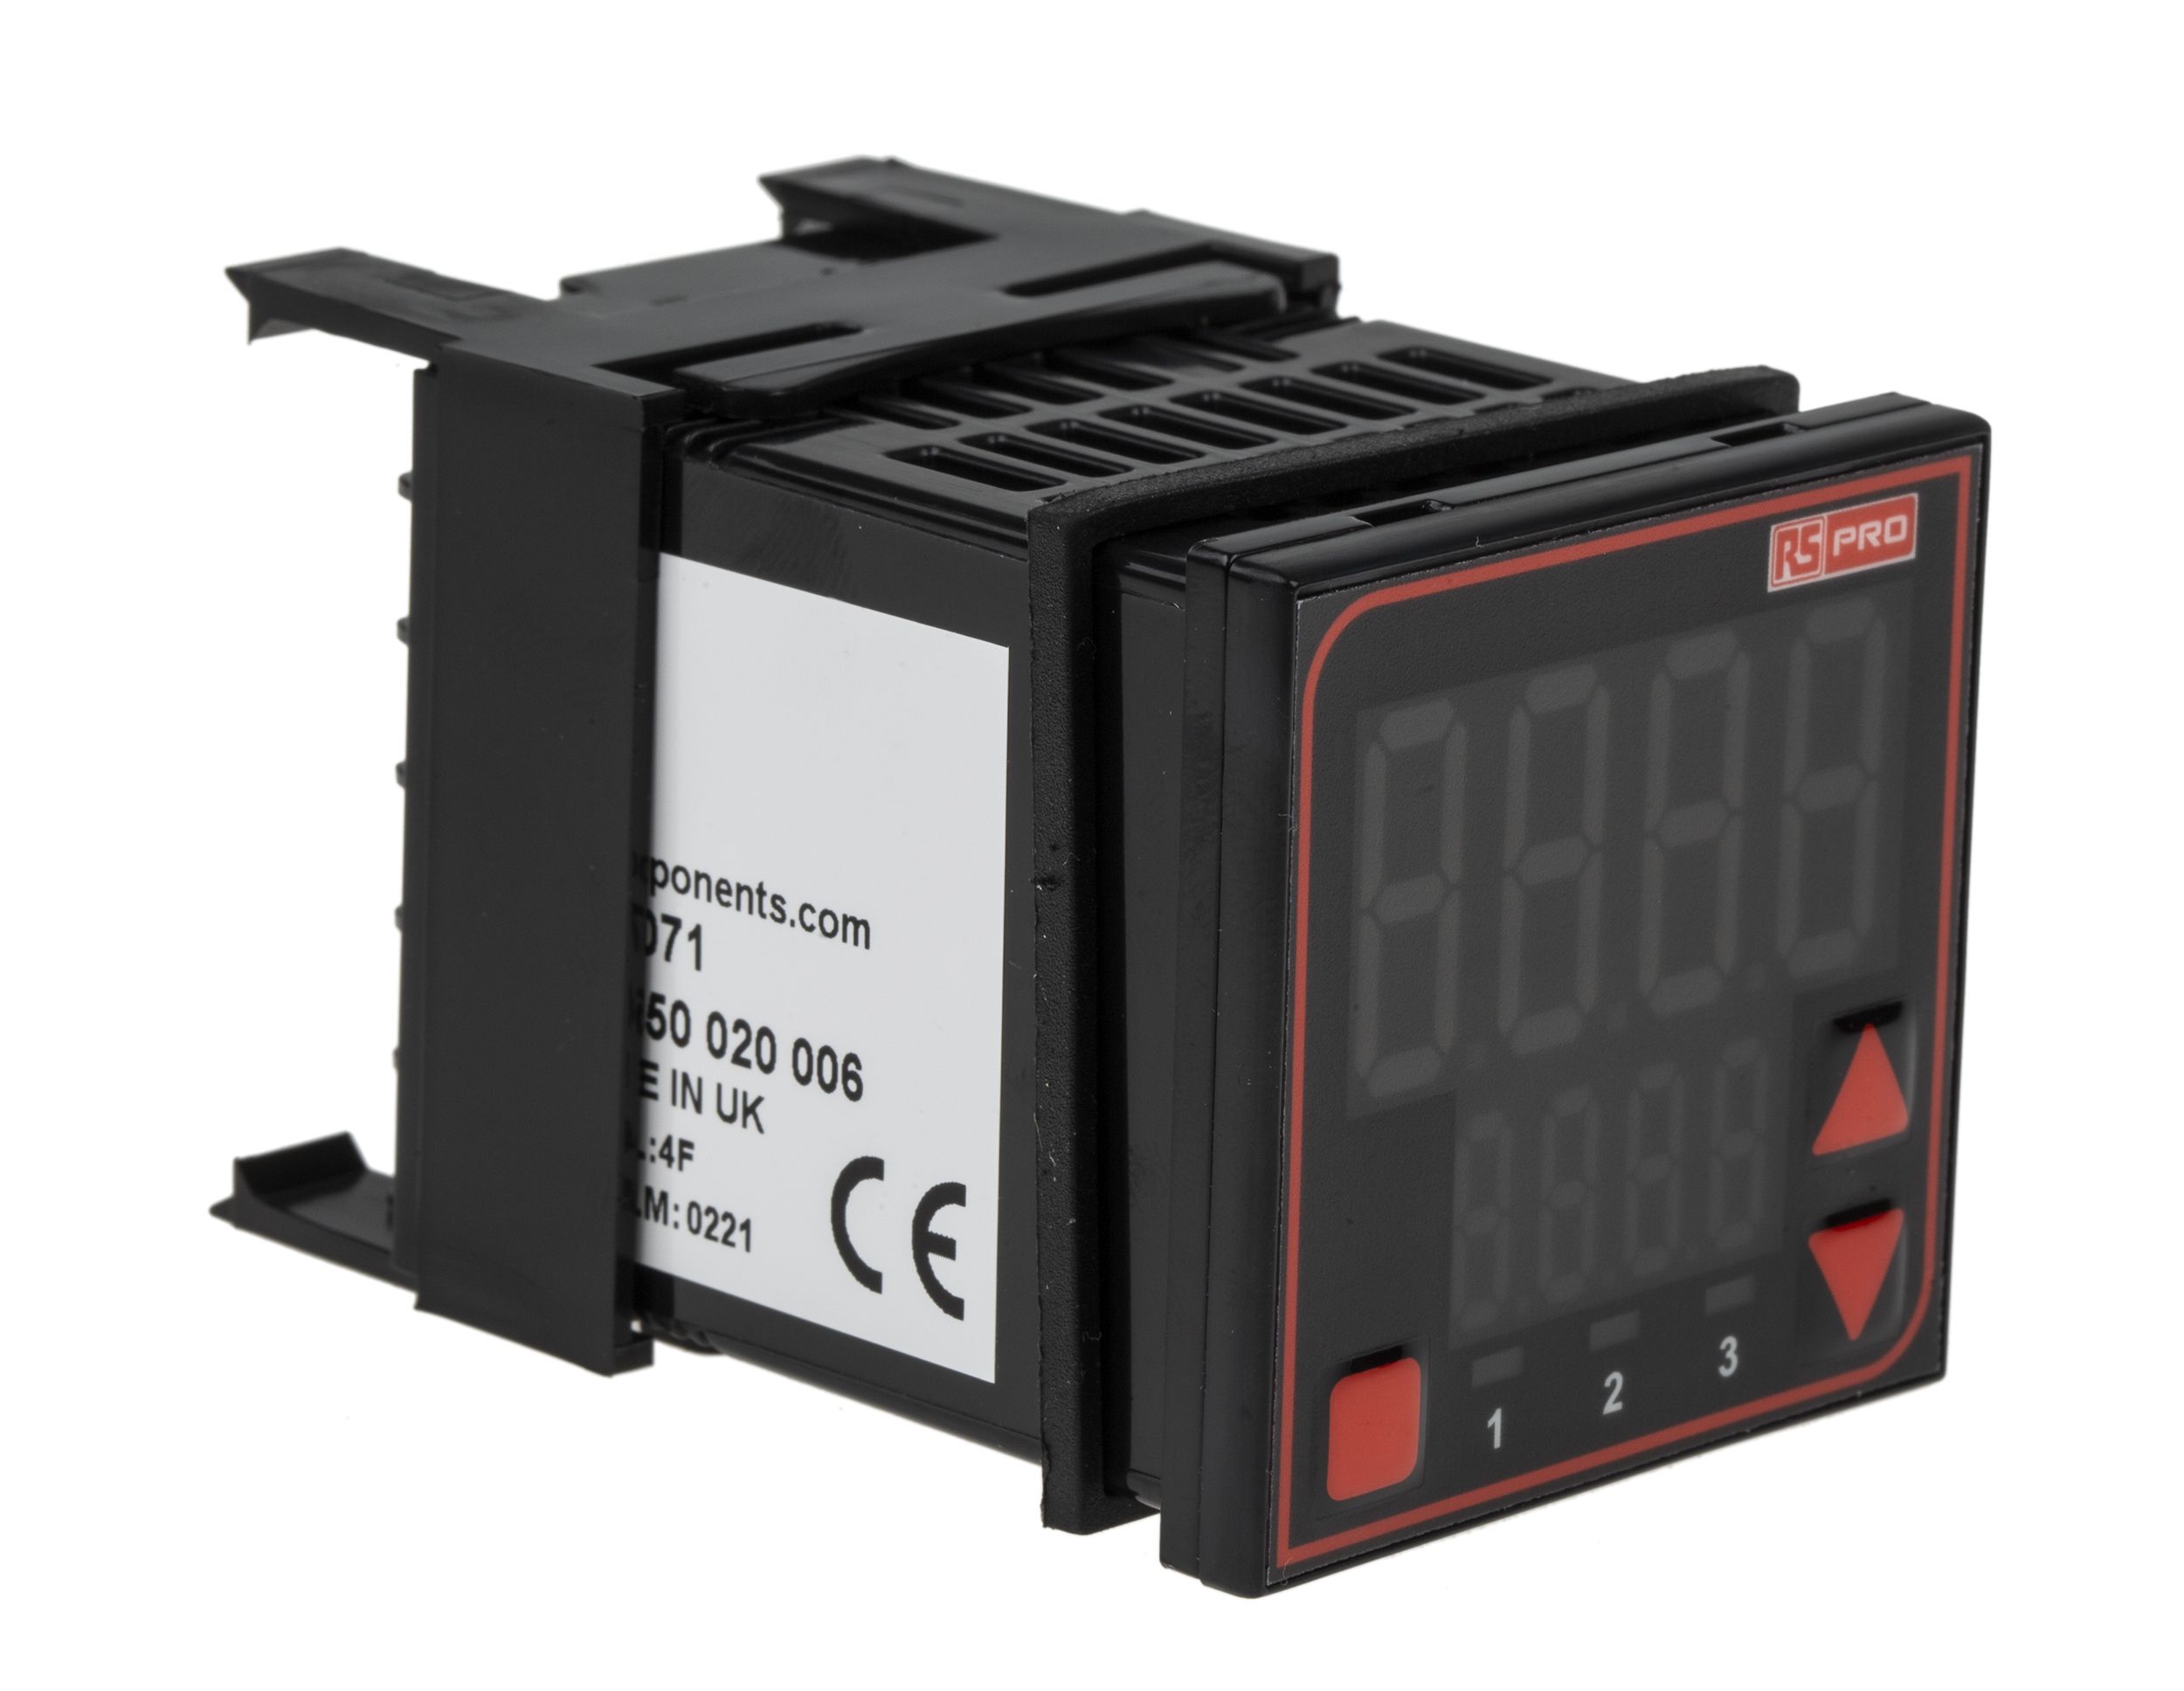 RS PRO Panel Mount PID Temperature Controller, 48 x 48mm, 3 Output Relay, SSR, 110 → 240 V ac Supply Voltage